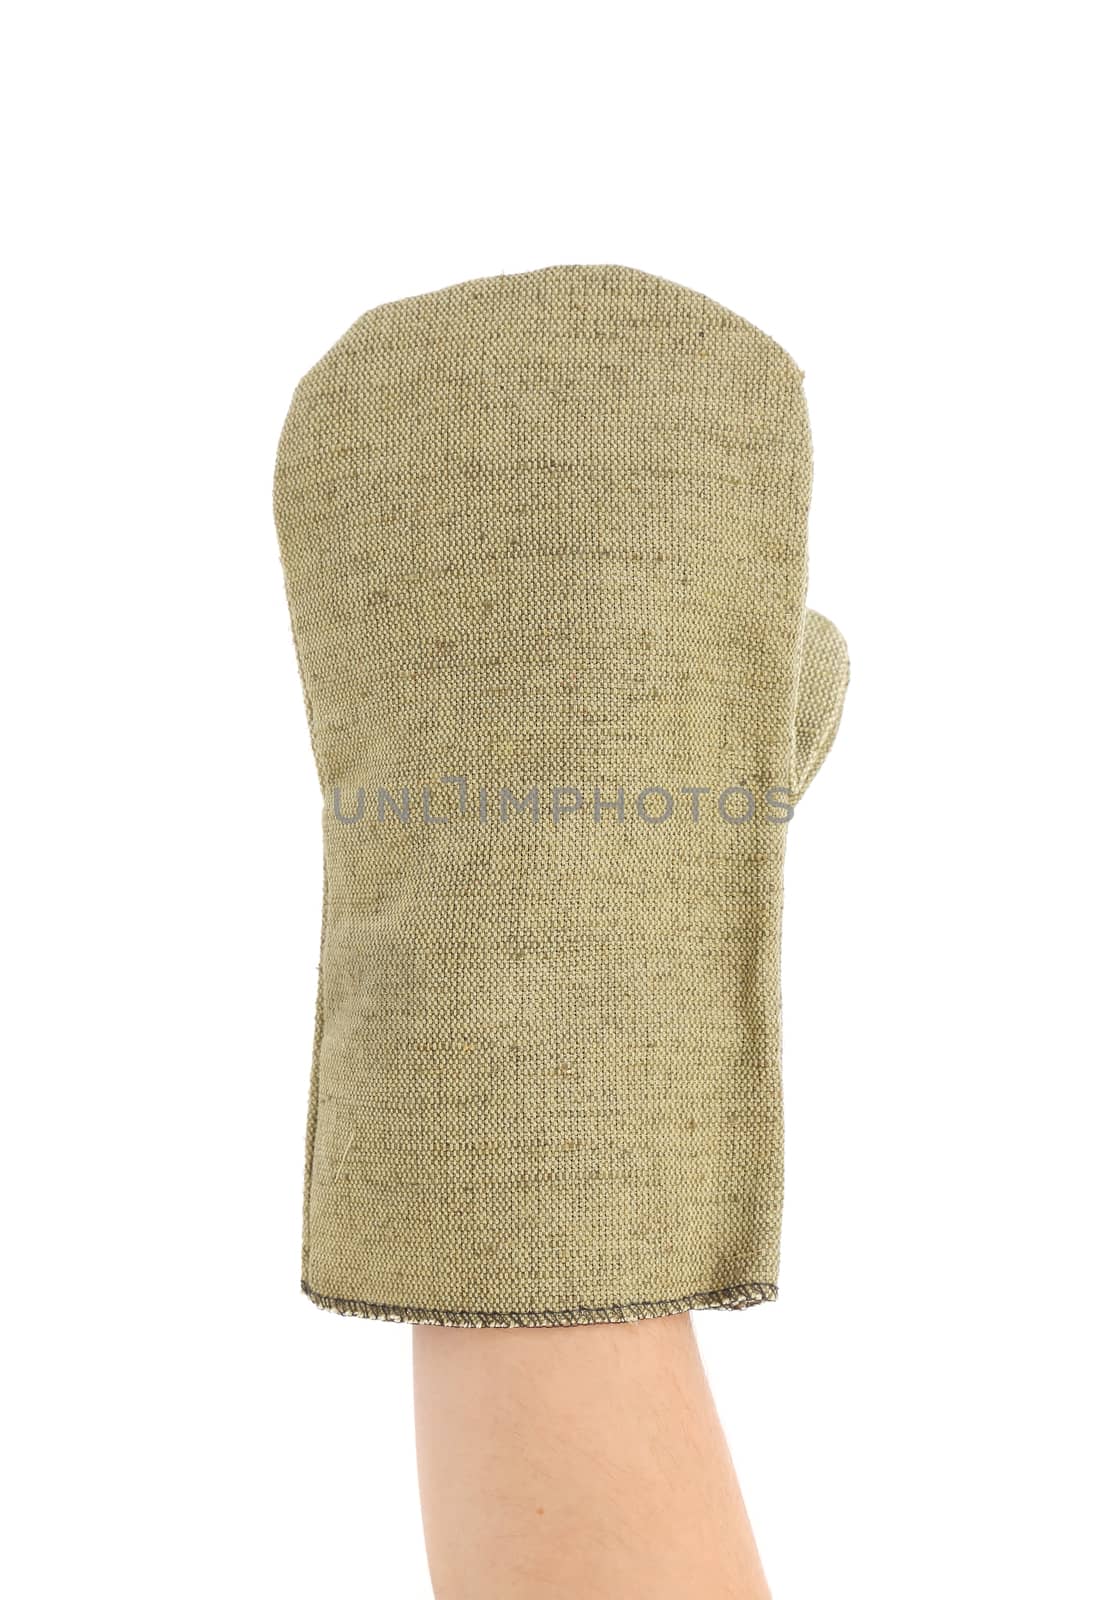 Protective glove. Isolated on a white background.